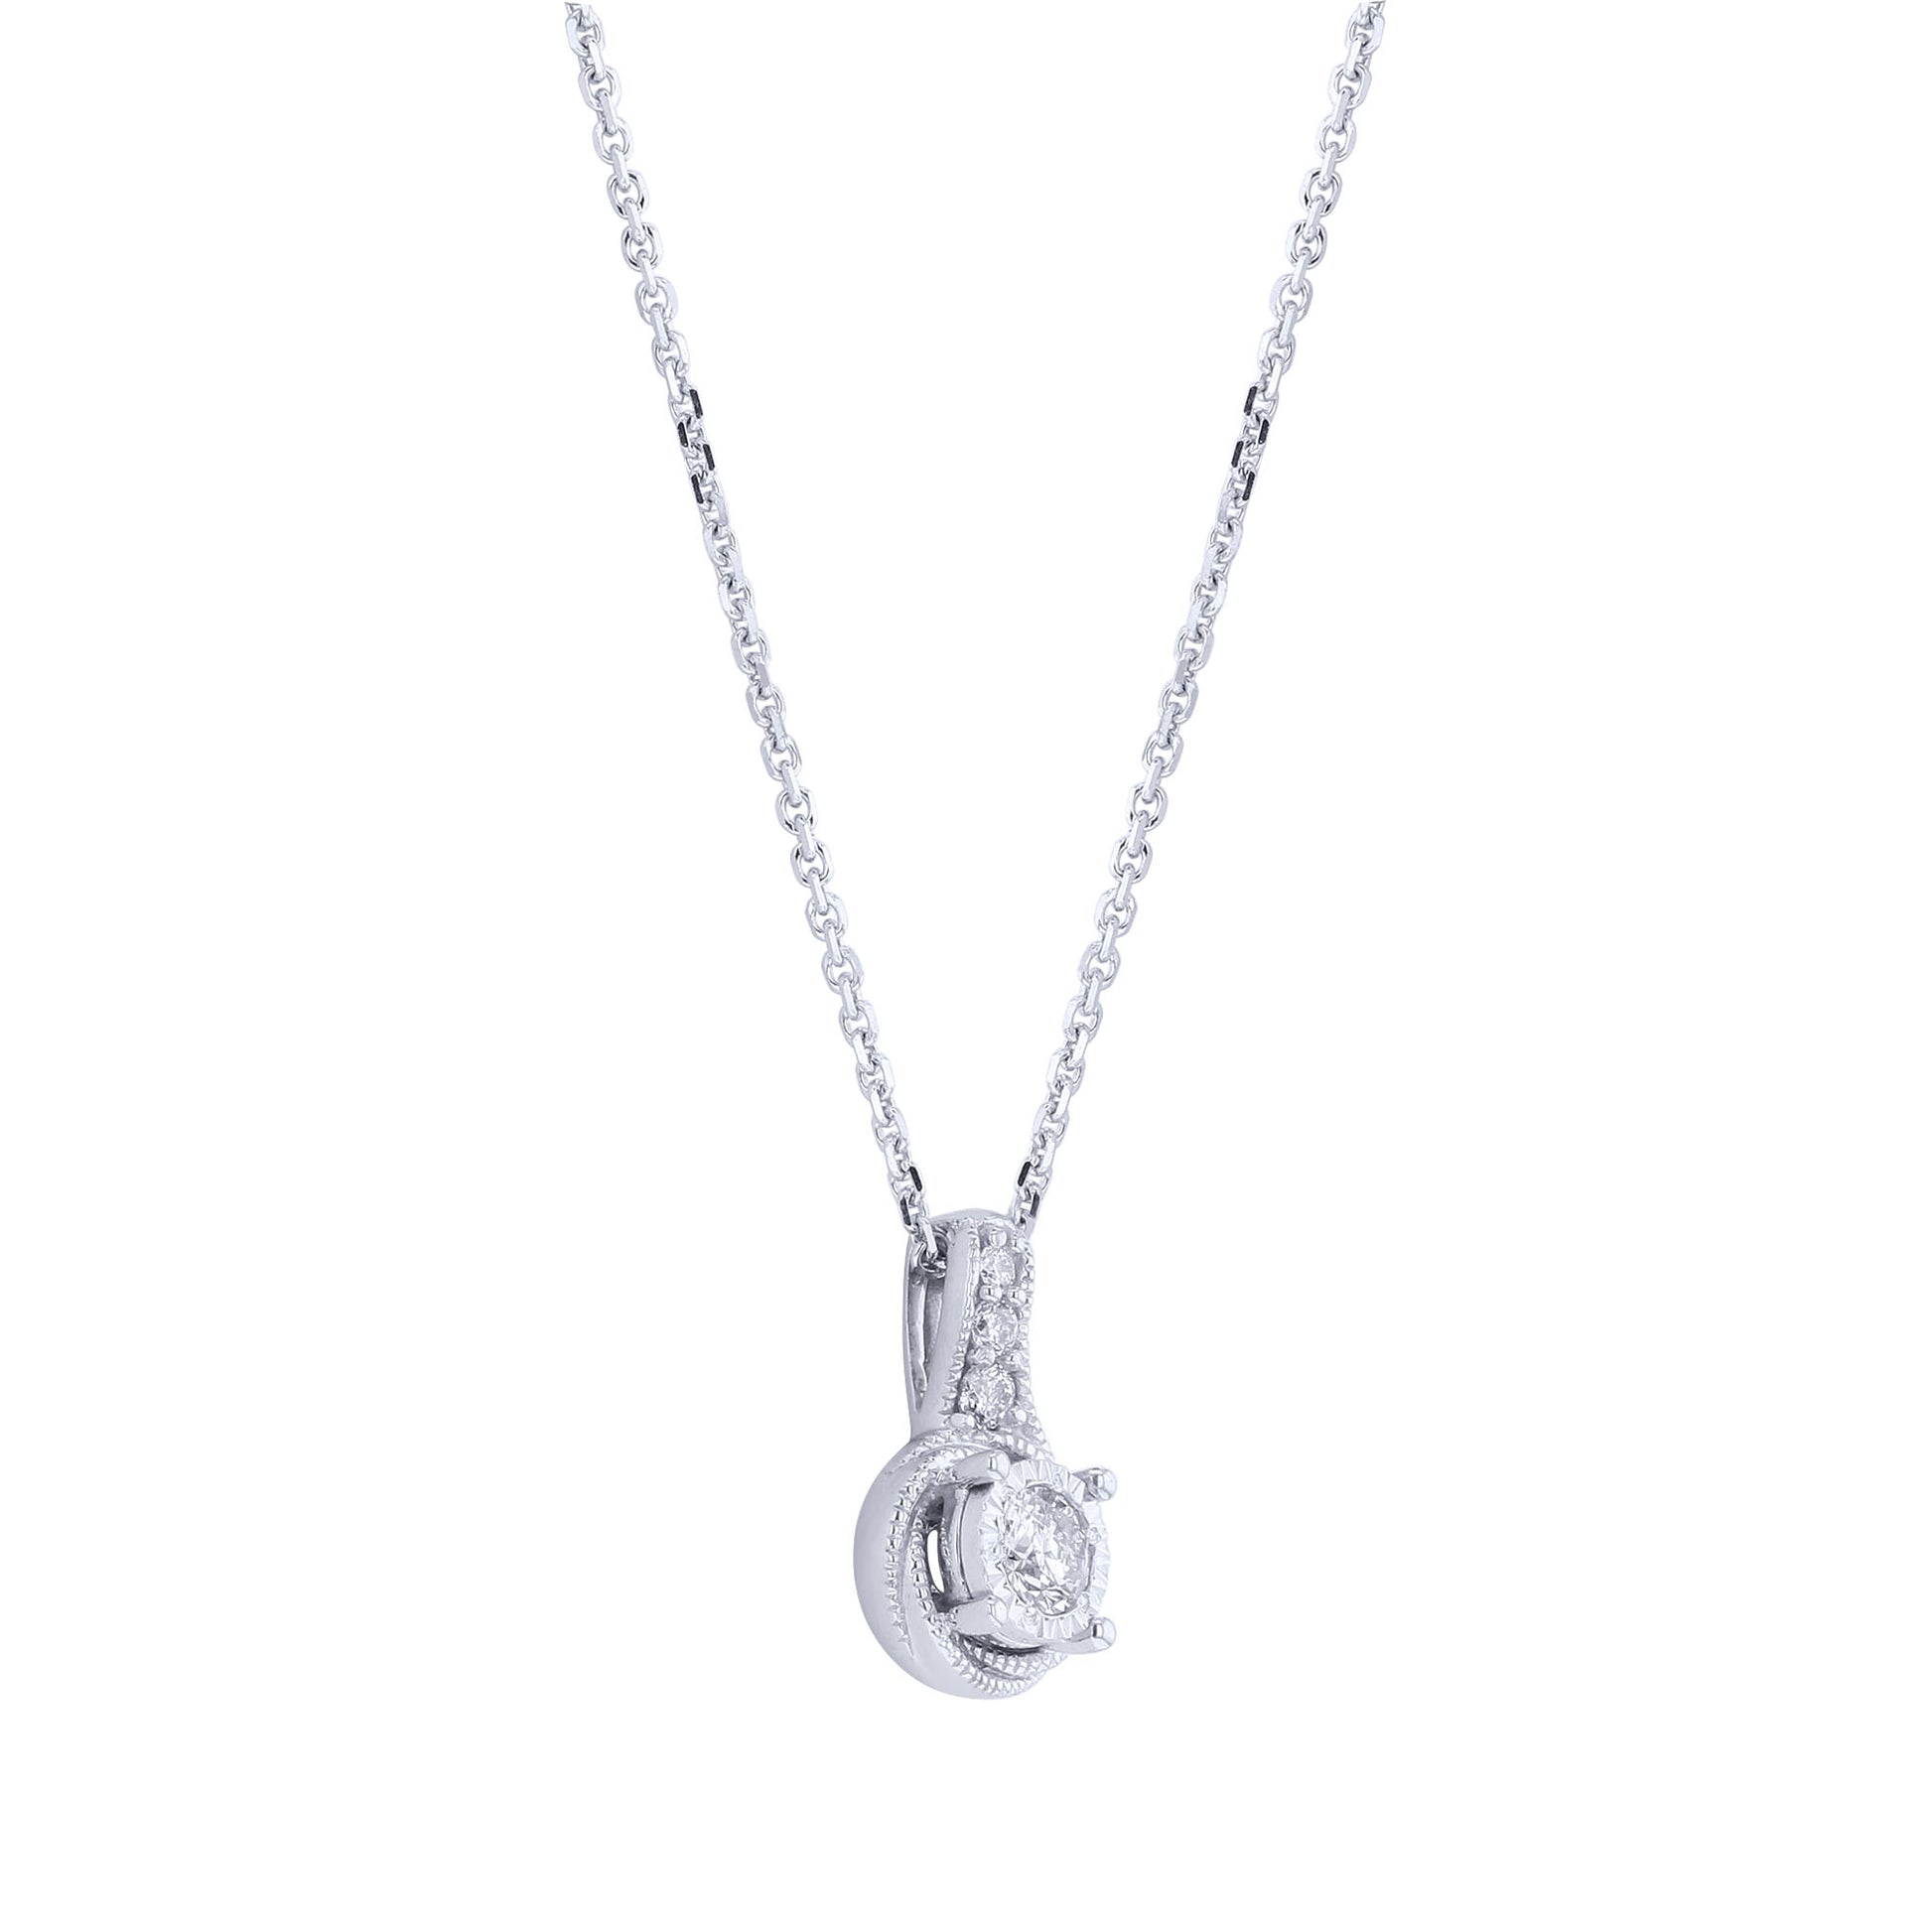 Silver Mirage Whirlwind Diamond Necklace